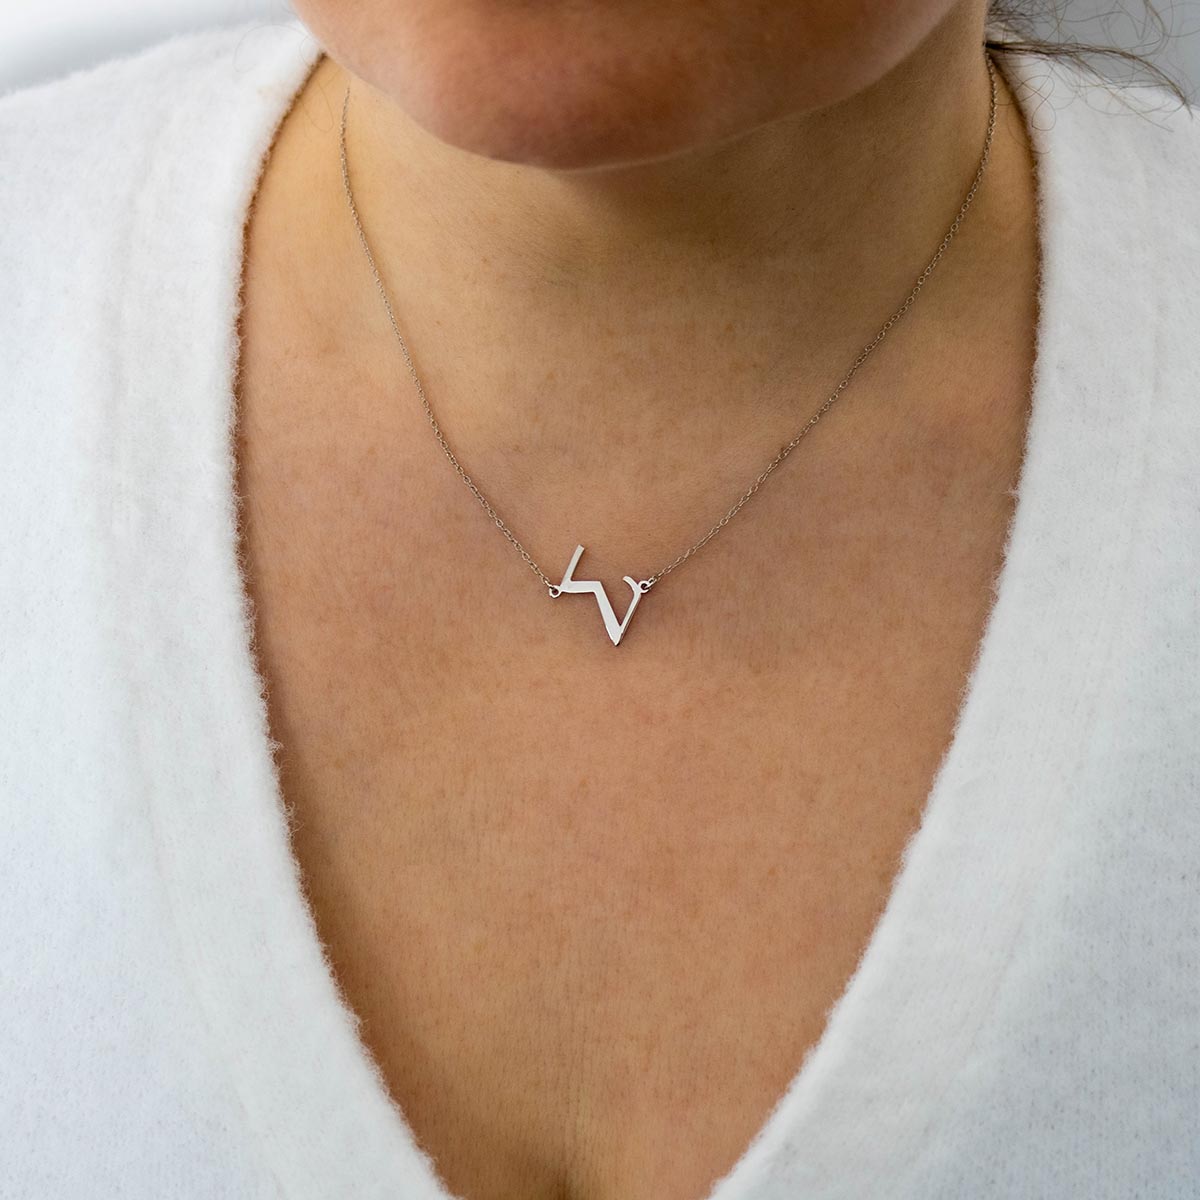 Louis Vuitton LV Paperplane Necklace, Silver, One Size